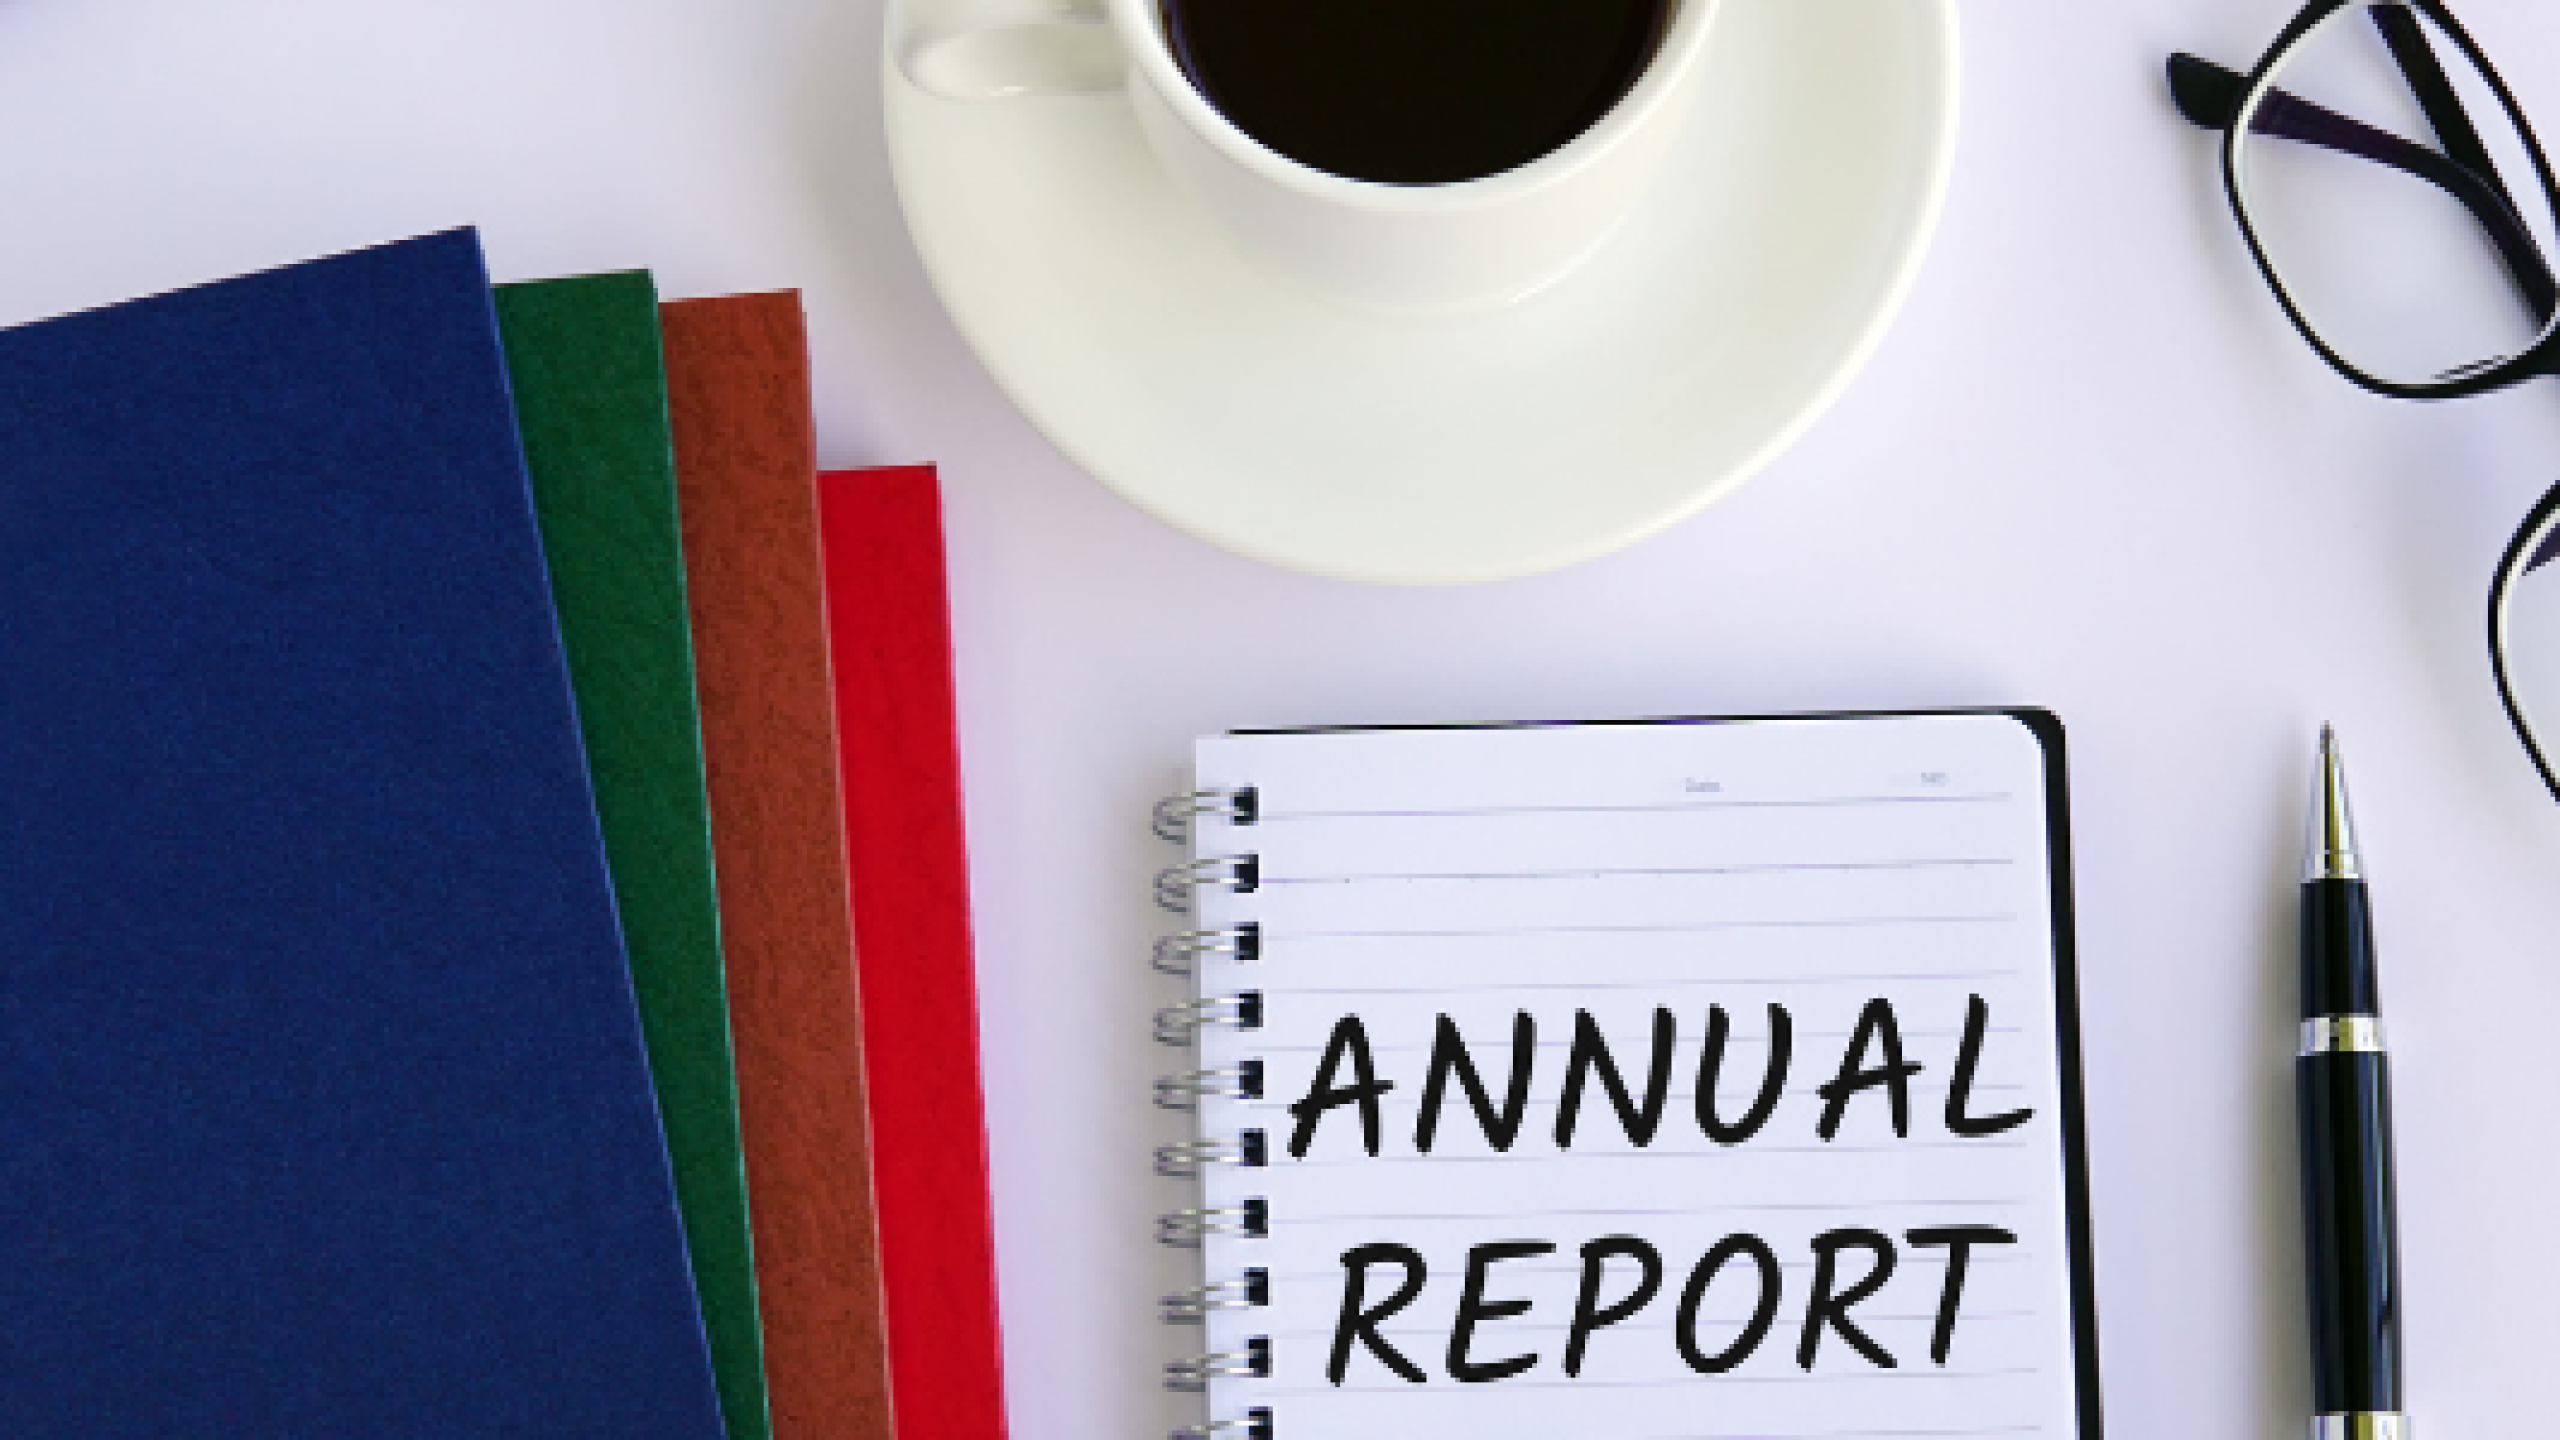 Annual Report with a cup of black coffee and four folders on a desk